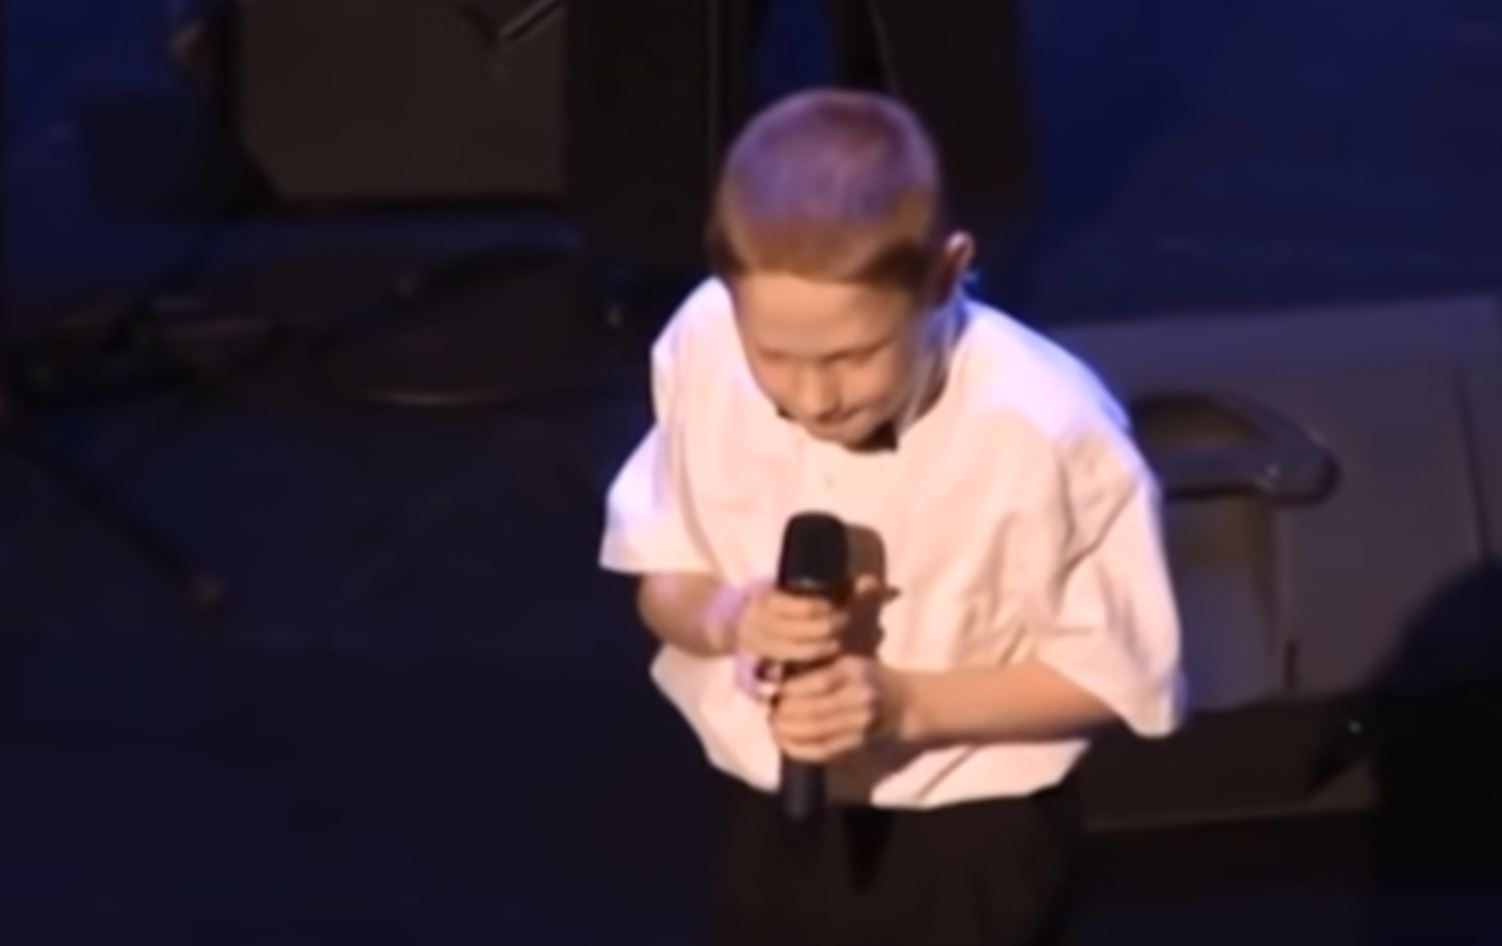 Open The Eyes of My Heart-A 10 year-old autistic and blind boy singing. His voice shocked everyone